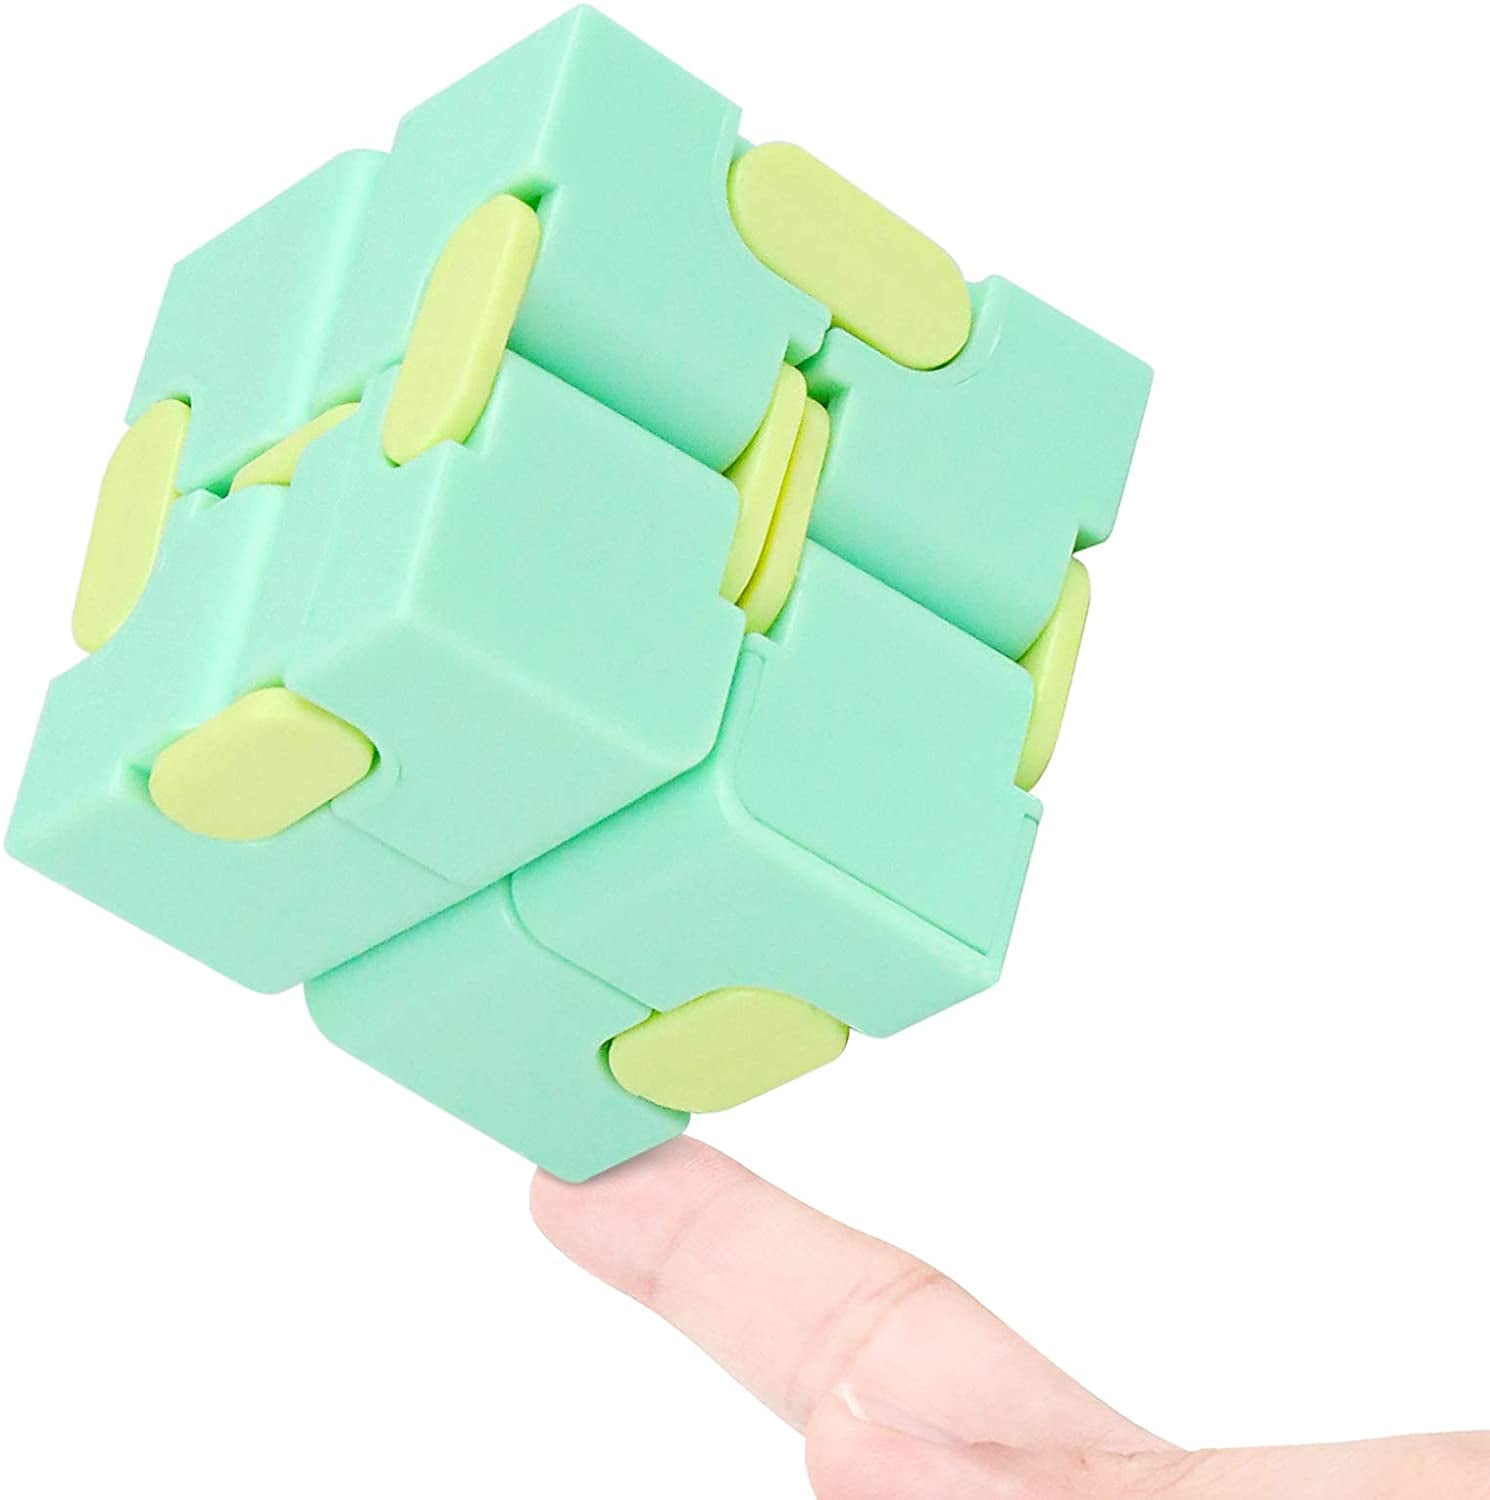 Camo Green  Fidget Cube For Anxiety Stress Relief Focus Autism Adults Toys USA 